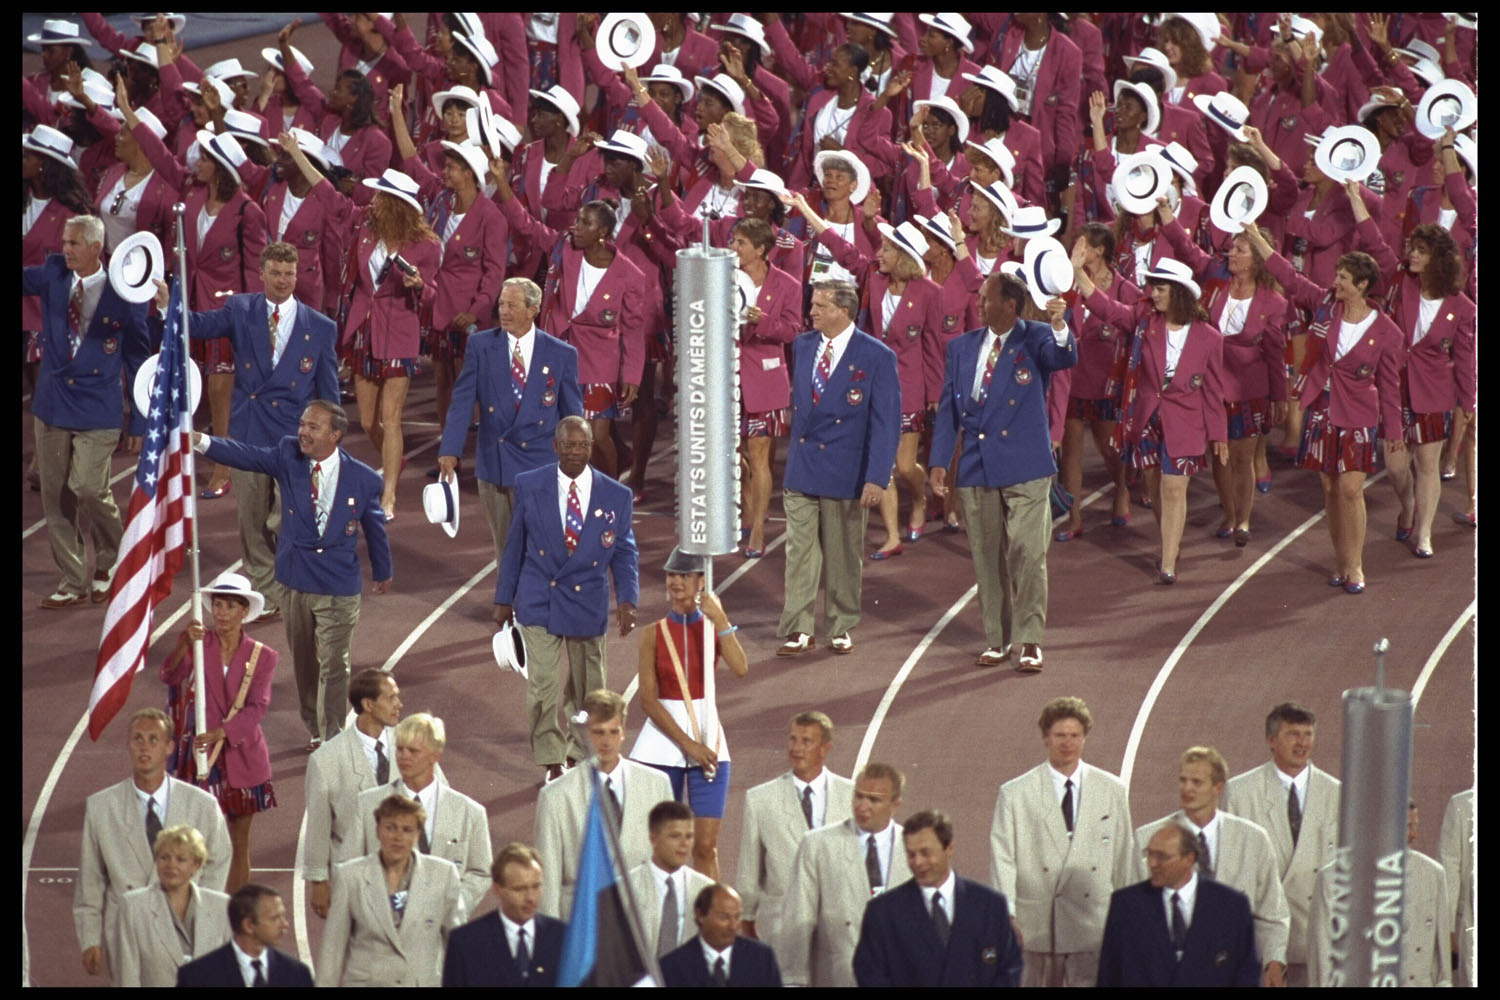 Track and Field athlete Francie Larrieu-Smith leads the USA Olympic Team at the start of the 1992 summer games in Barcelona.